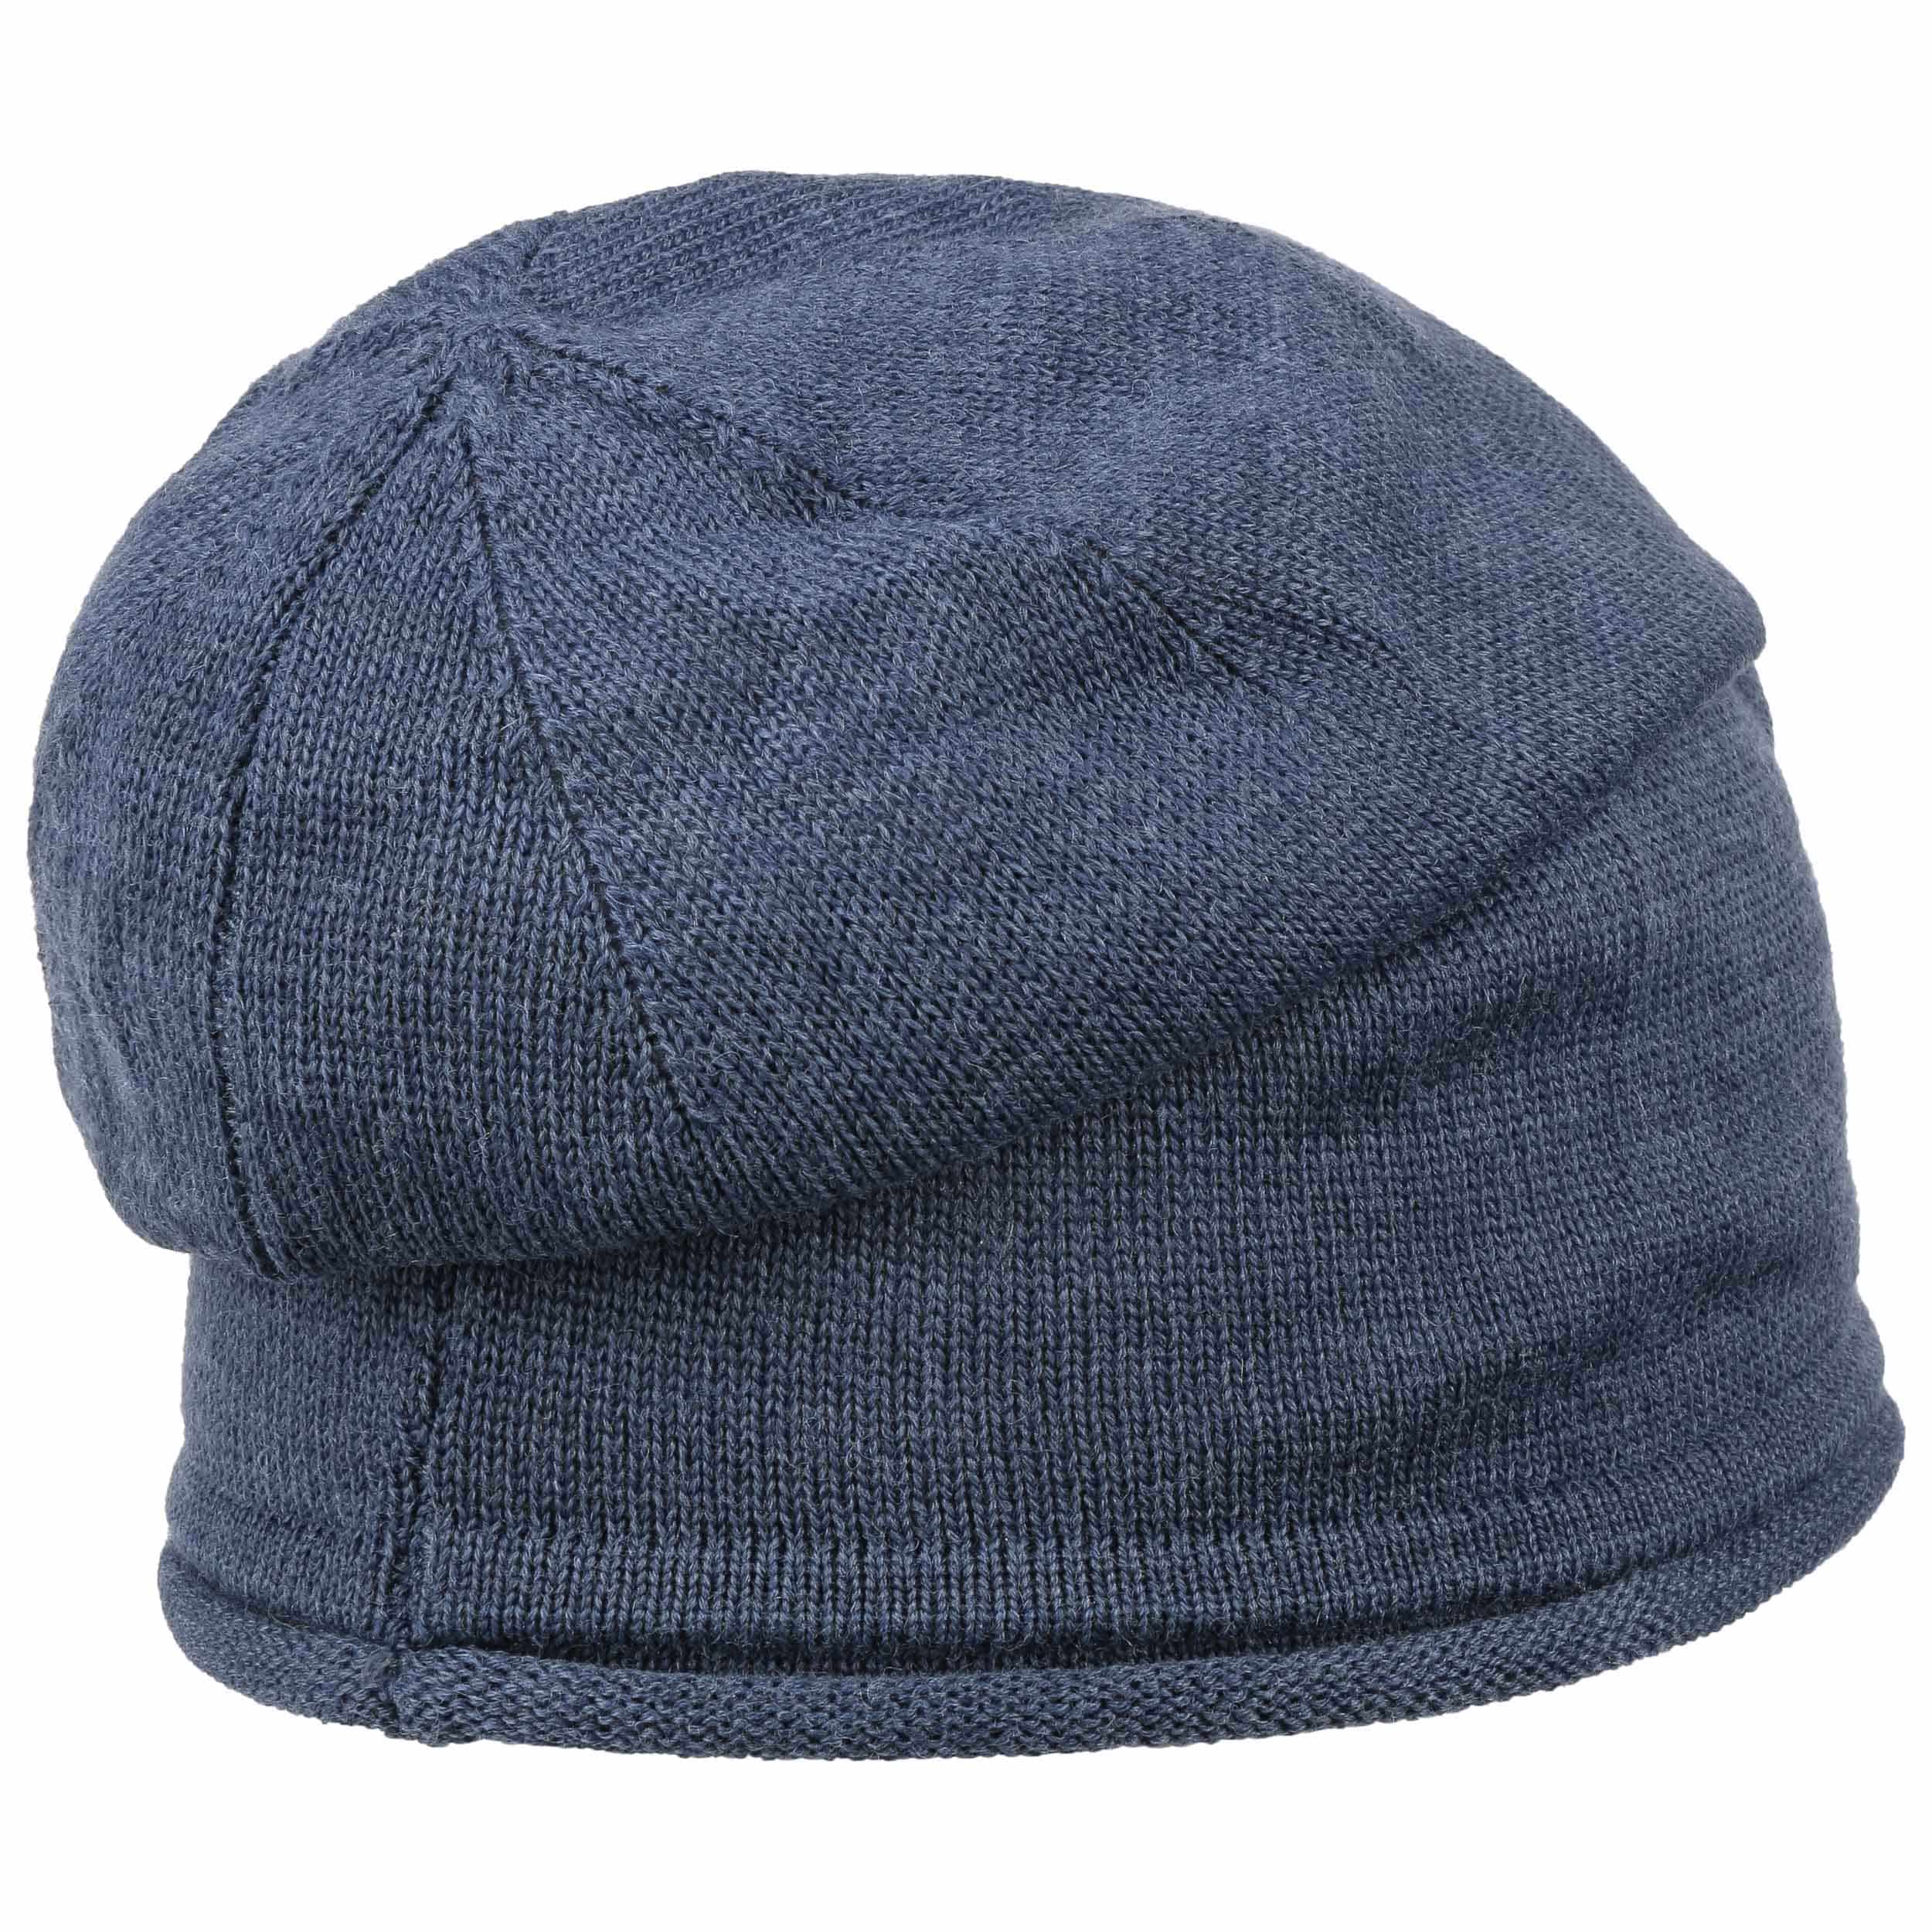 Leicester Oversize Beanie by Chillouts - 27,99 €